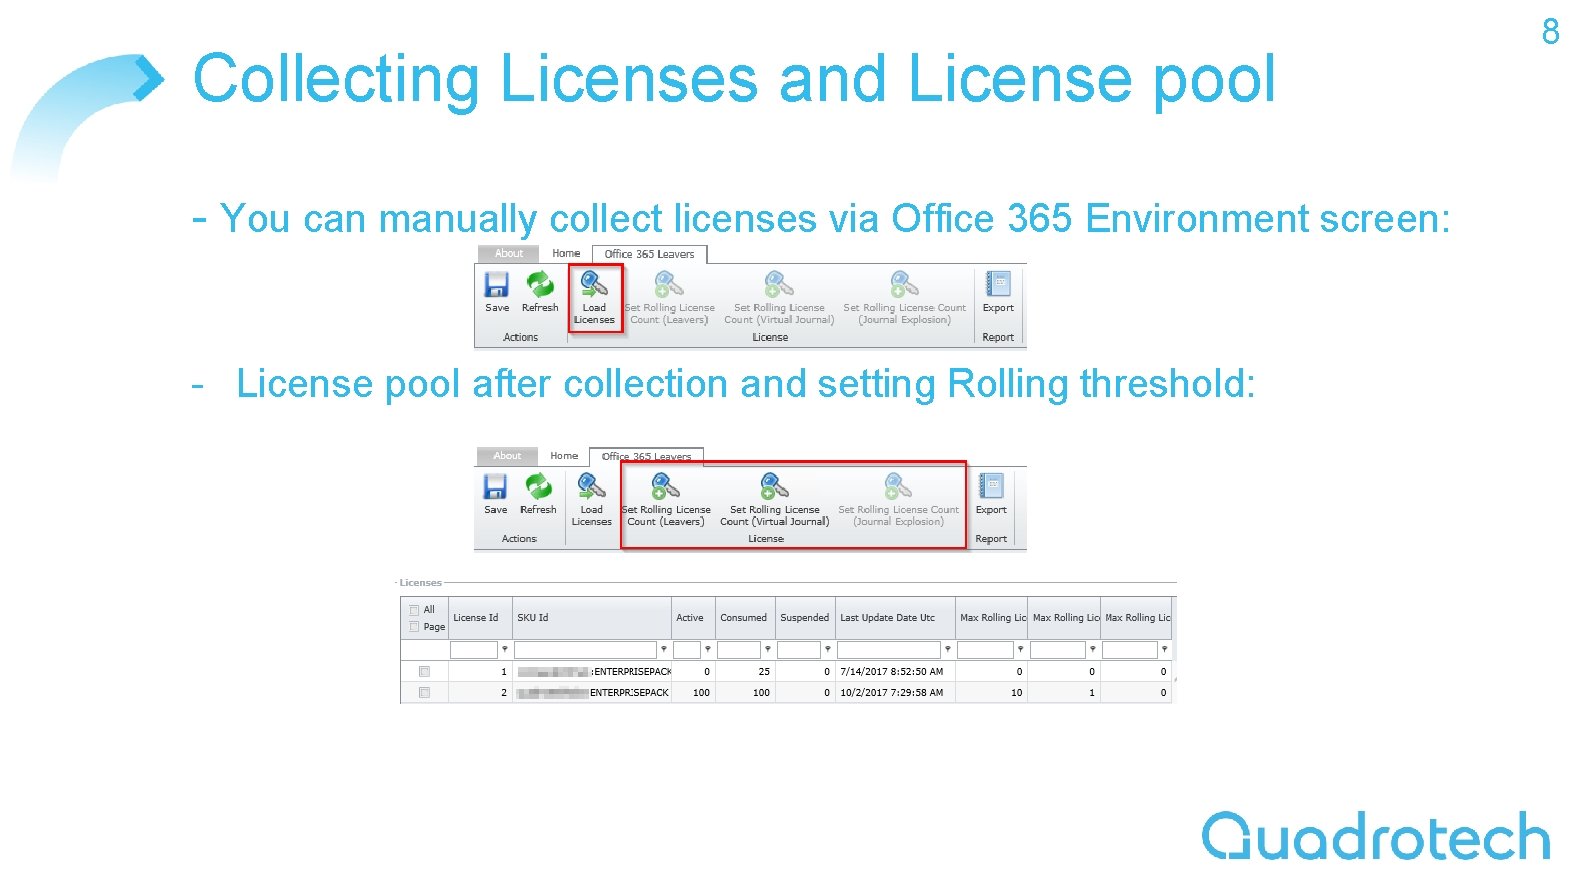 Collecting Licenses and License pool - You can manually collect licenses via Office 365